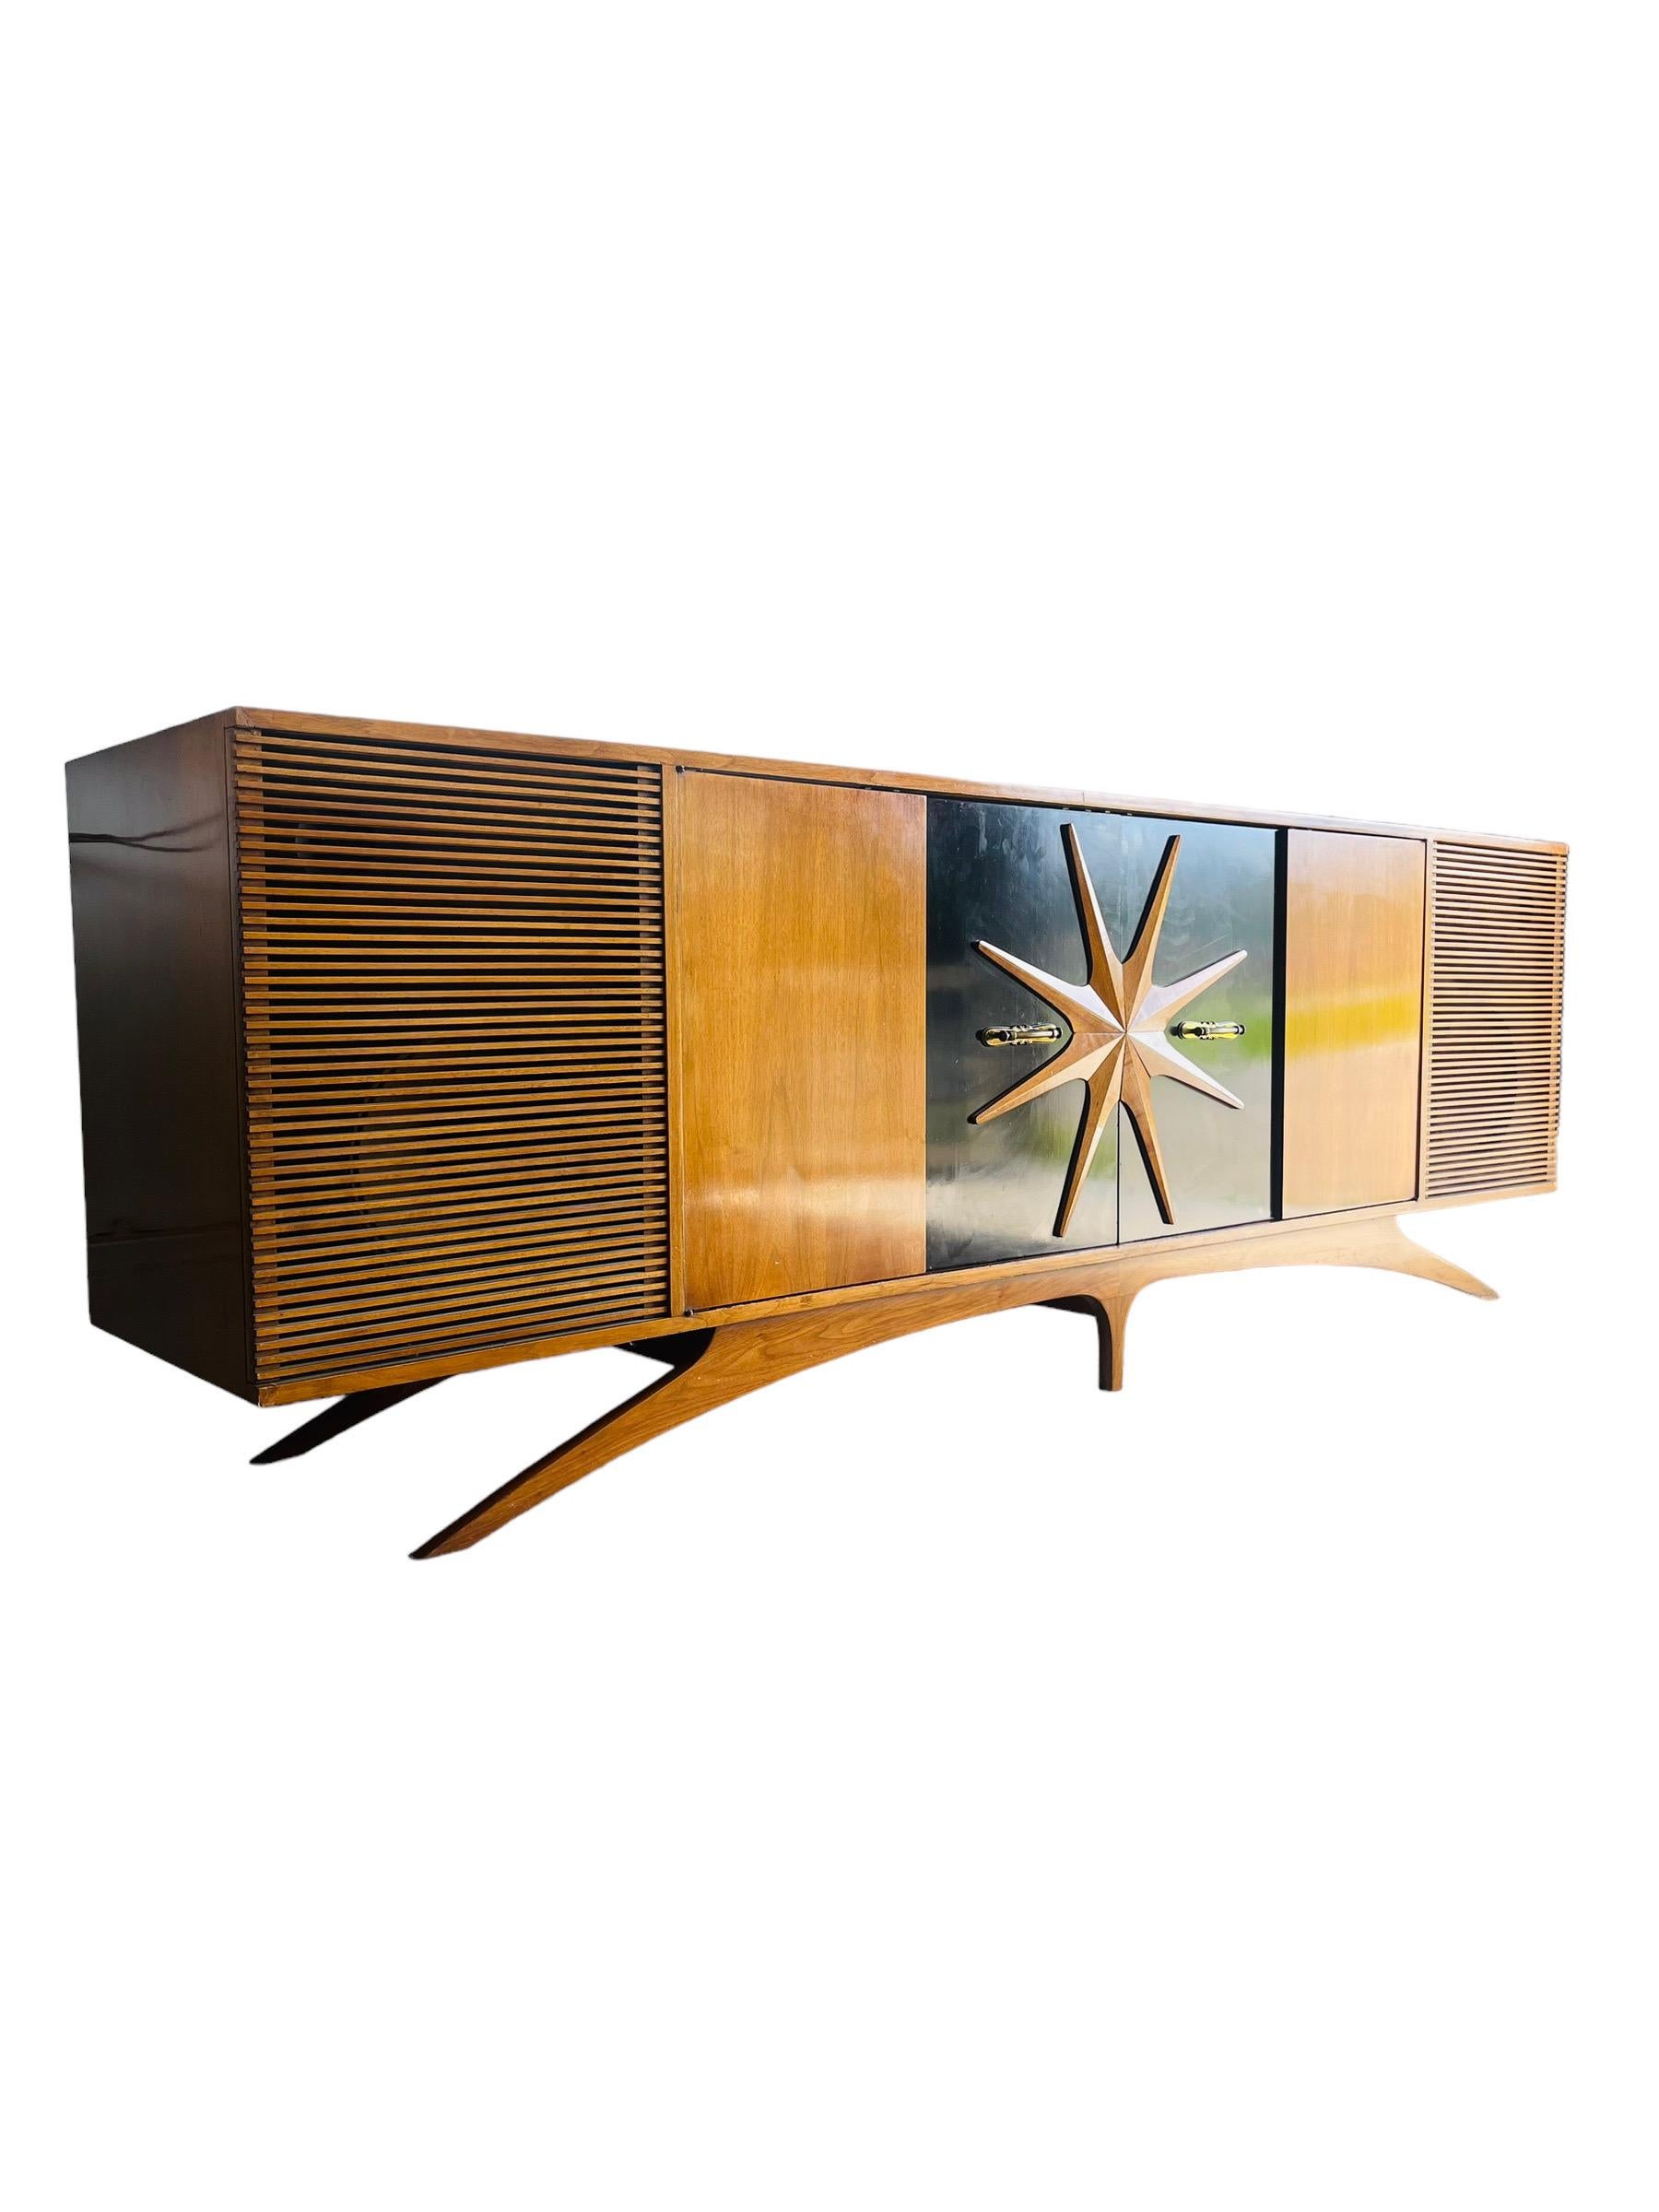 This extraordinary Mid Century Modern sculptural credenza captures both functionality and visual appeal. Reminiscent of the work of renowned designer Vladimir Kagan, this walnut cabinet showcases exceptional craftsmanship and beautiful woodgrain